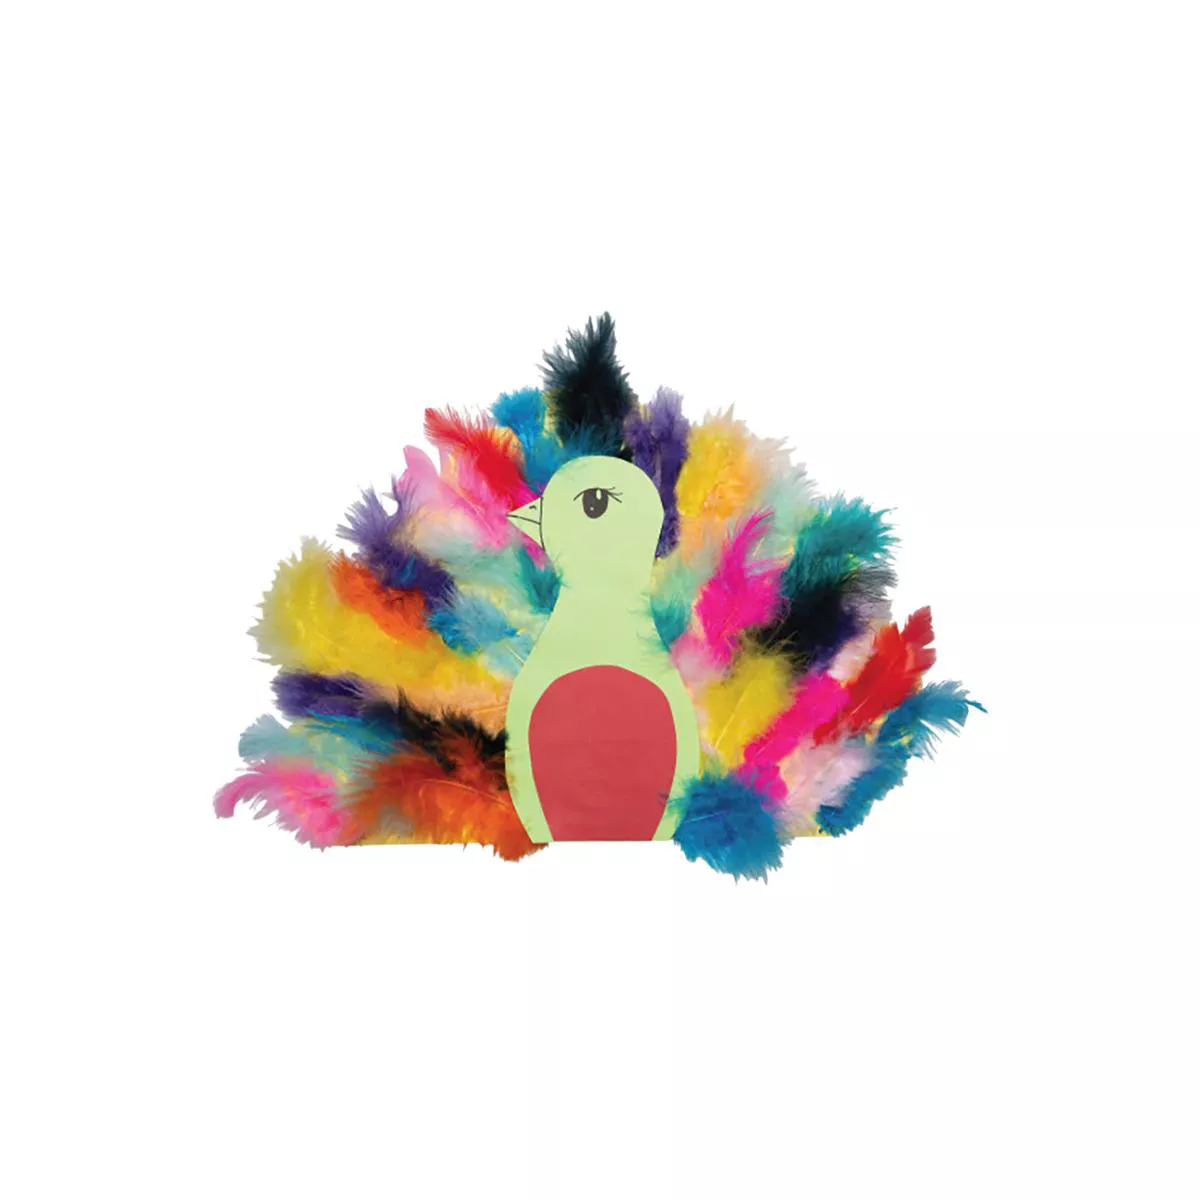 School Smart Marabou Feathers, 9-1/2 Ounces, Assorted Colors, Pack of 3000